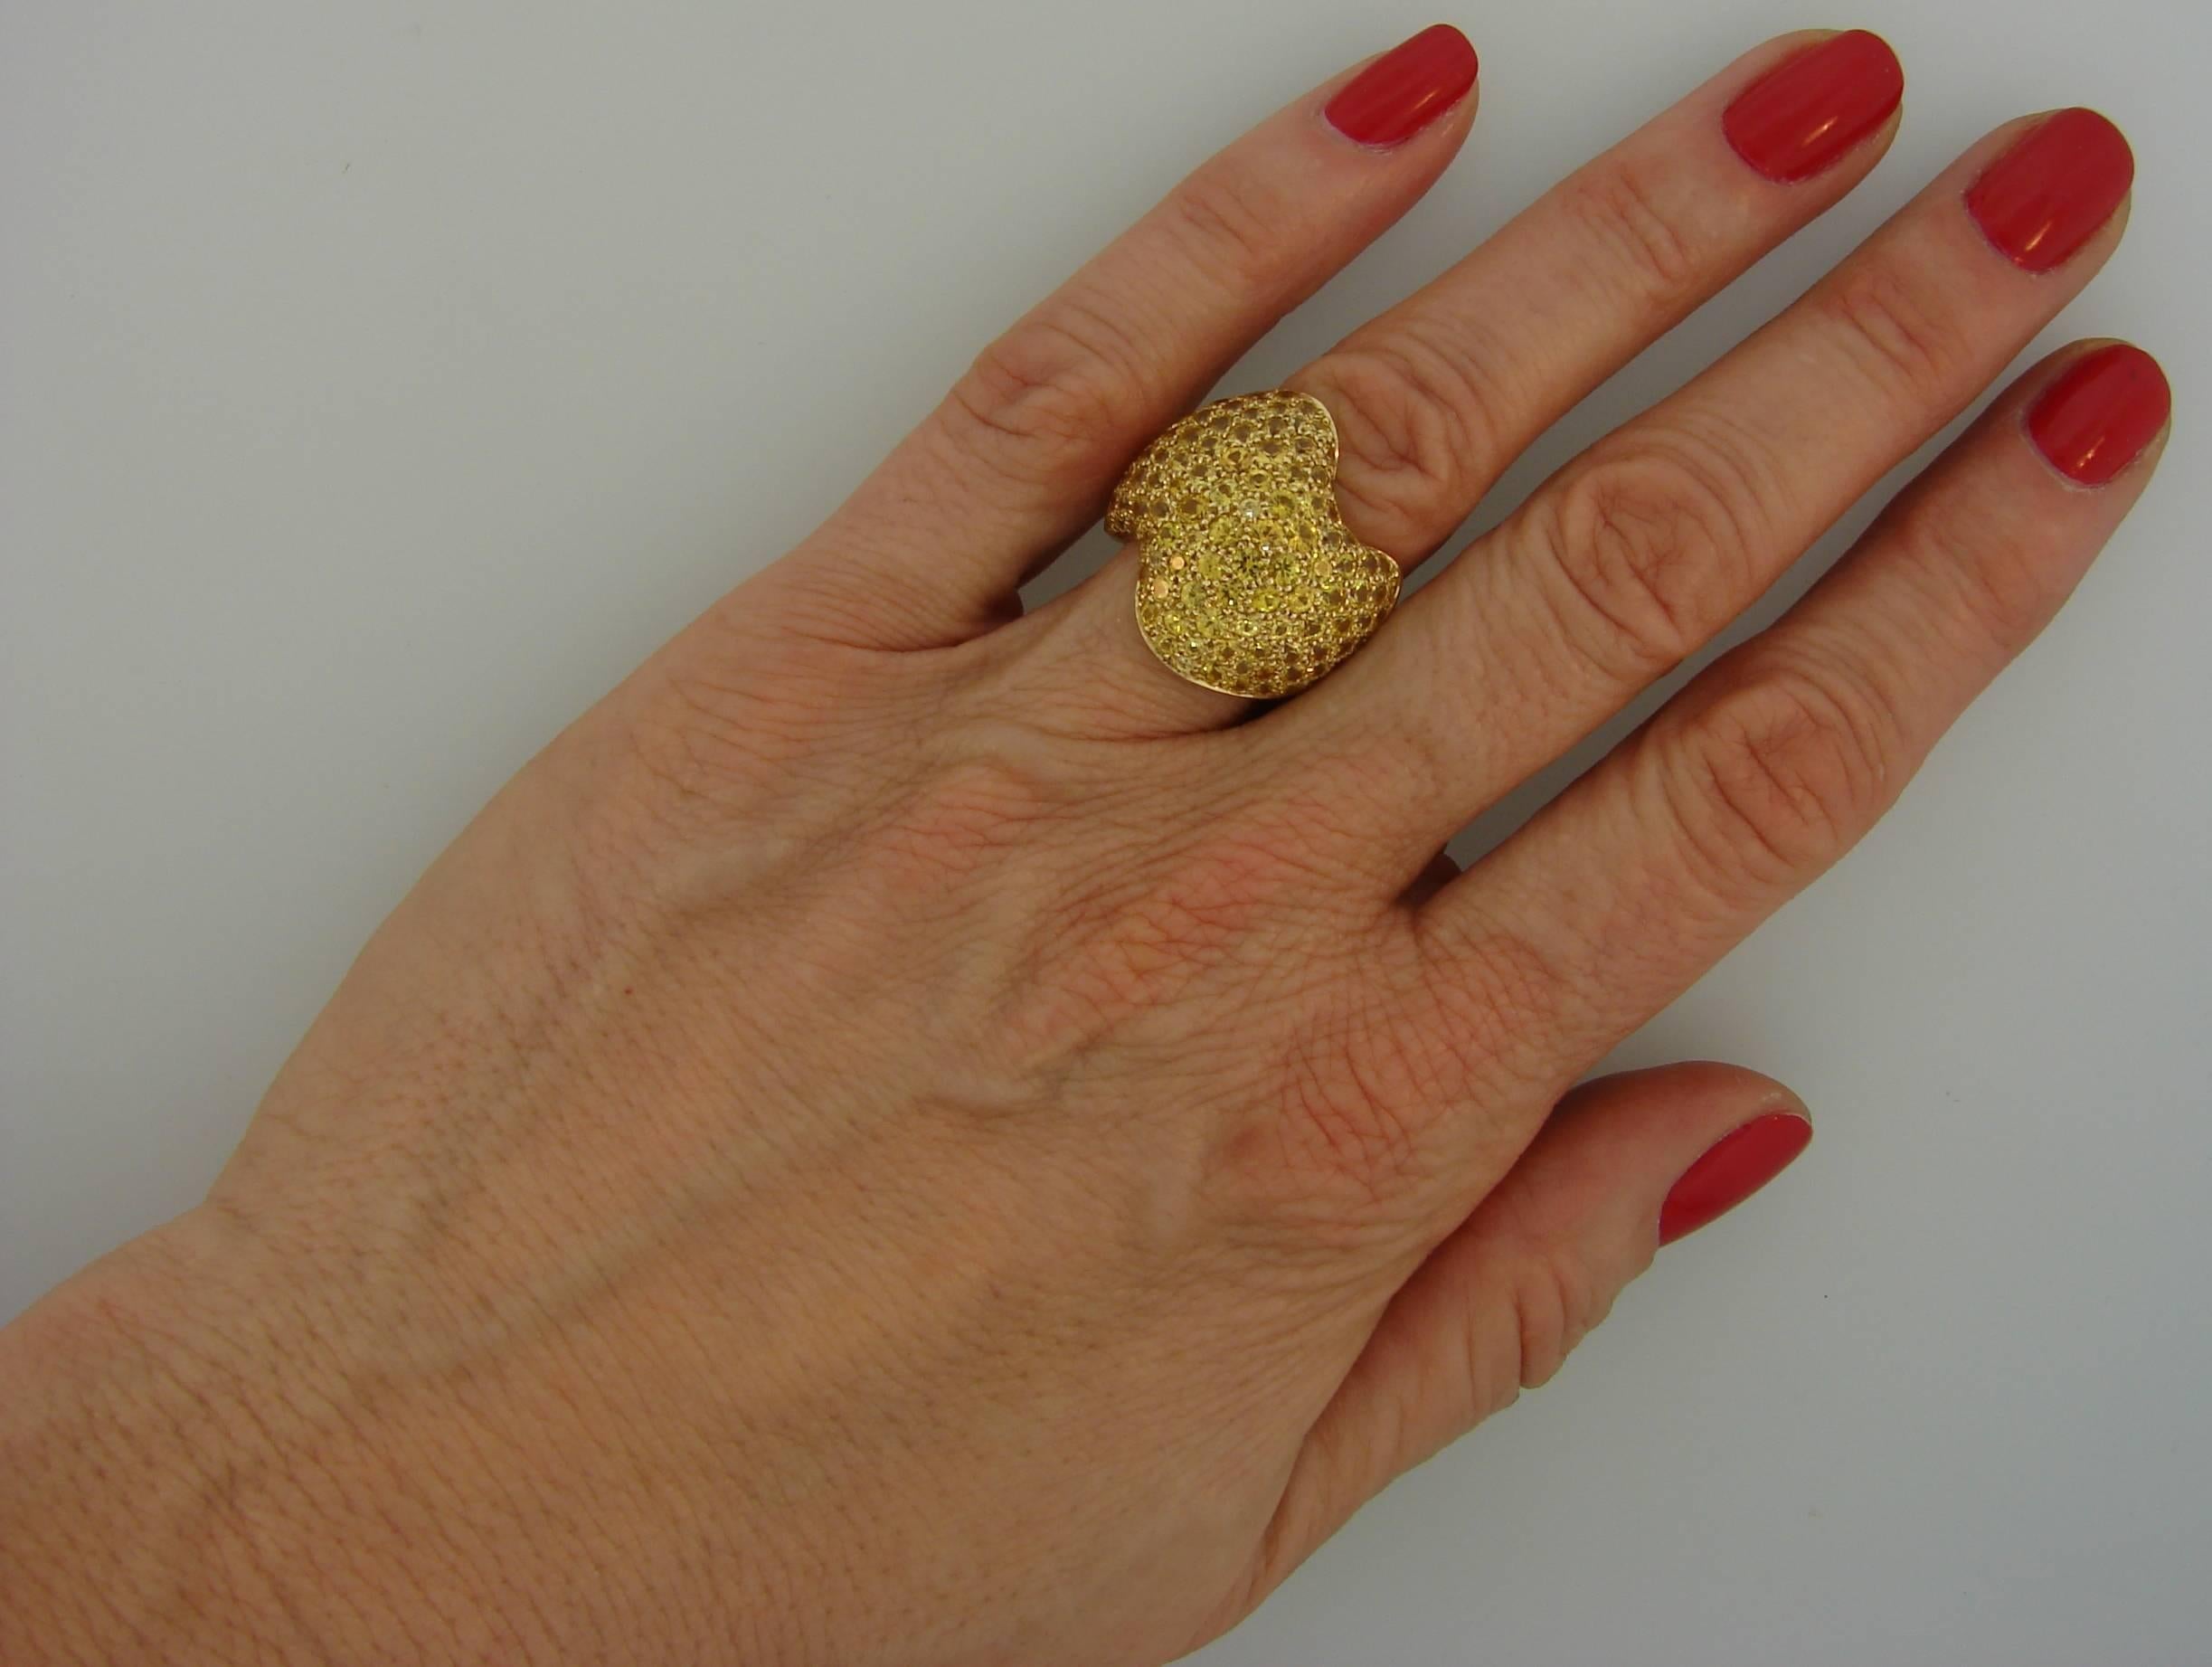 Elegant and classy ring created by Van Cleef & Arpels in France in the 1980s. Timeless, wearable and chic, the ring is a great addition to our jewelry collection.
Made of 18 karat yellow gold and pave set with one-hundred-eighteen round faceted